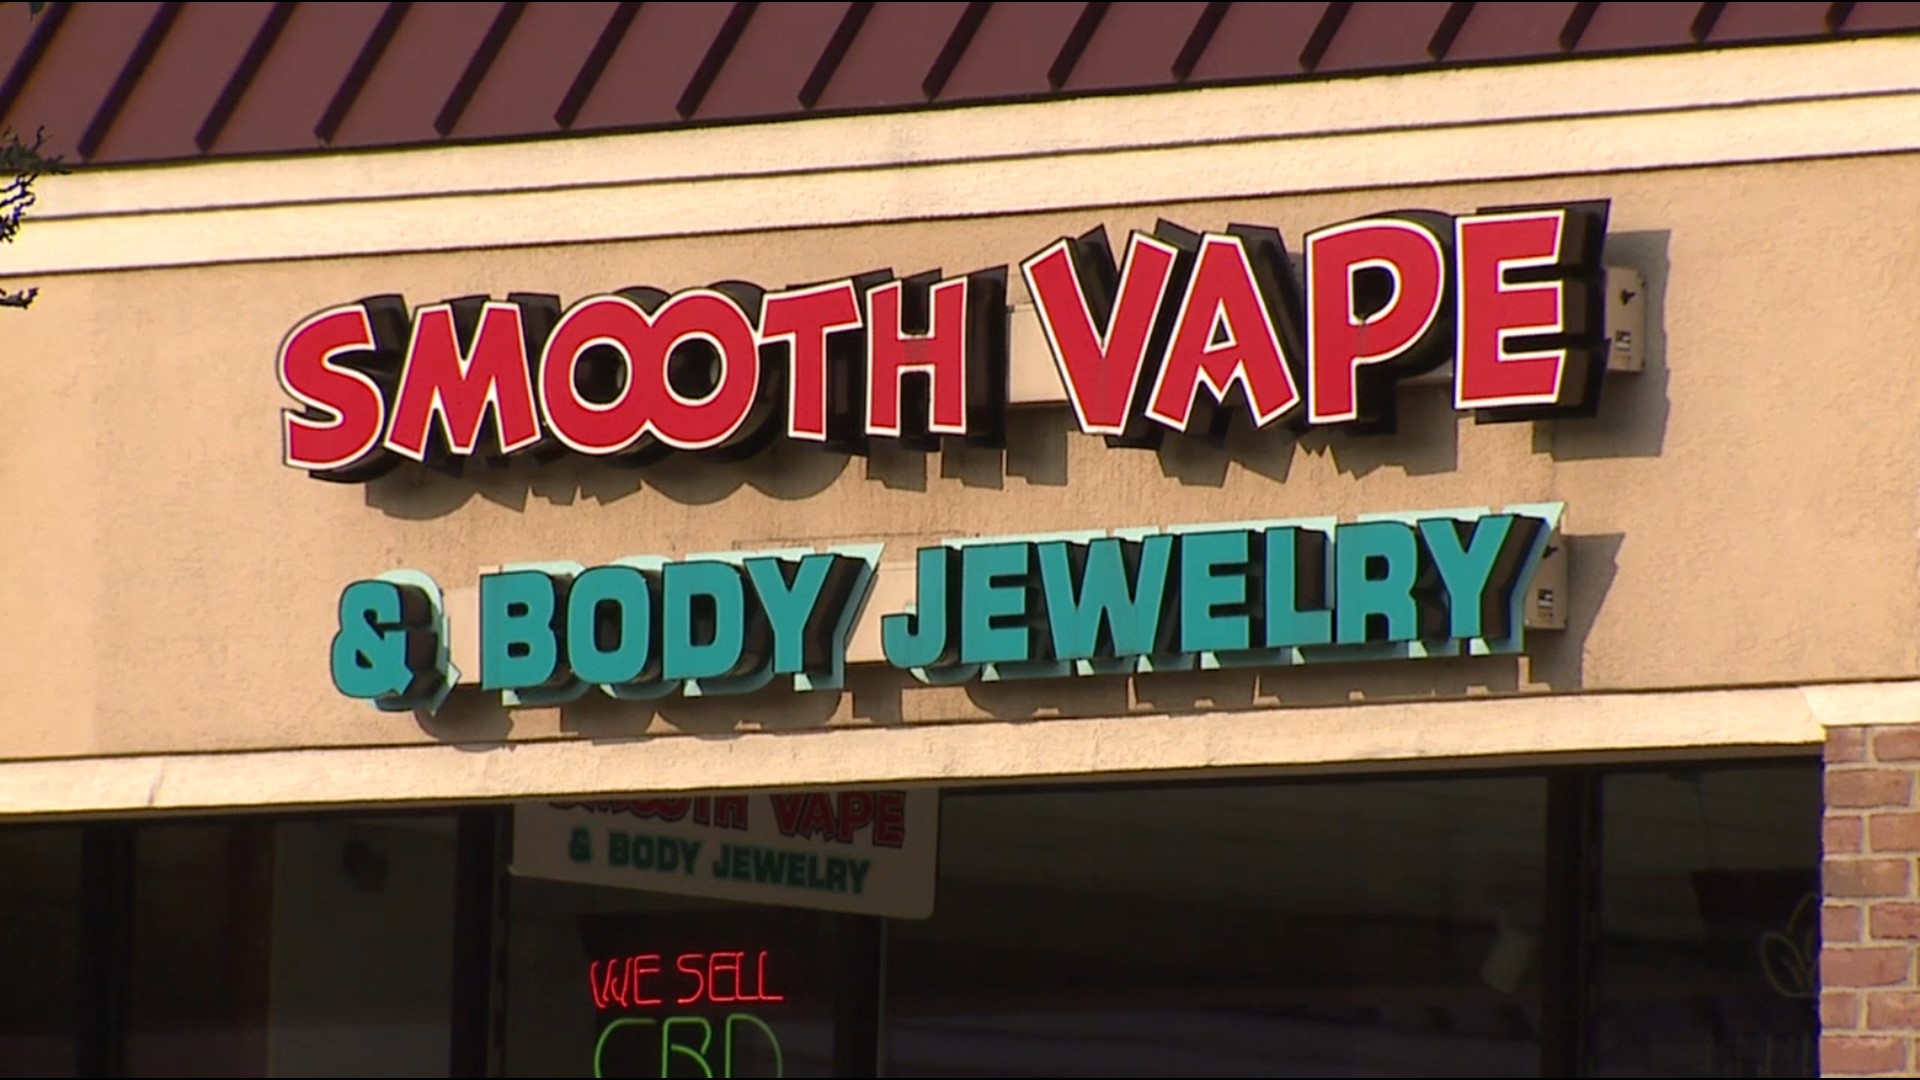 Smooth Vape LLC filed the lawsuit claiming that Lancaster County law enforcement officials performed a warrantless search and seizure of legal hemp-derived products.